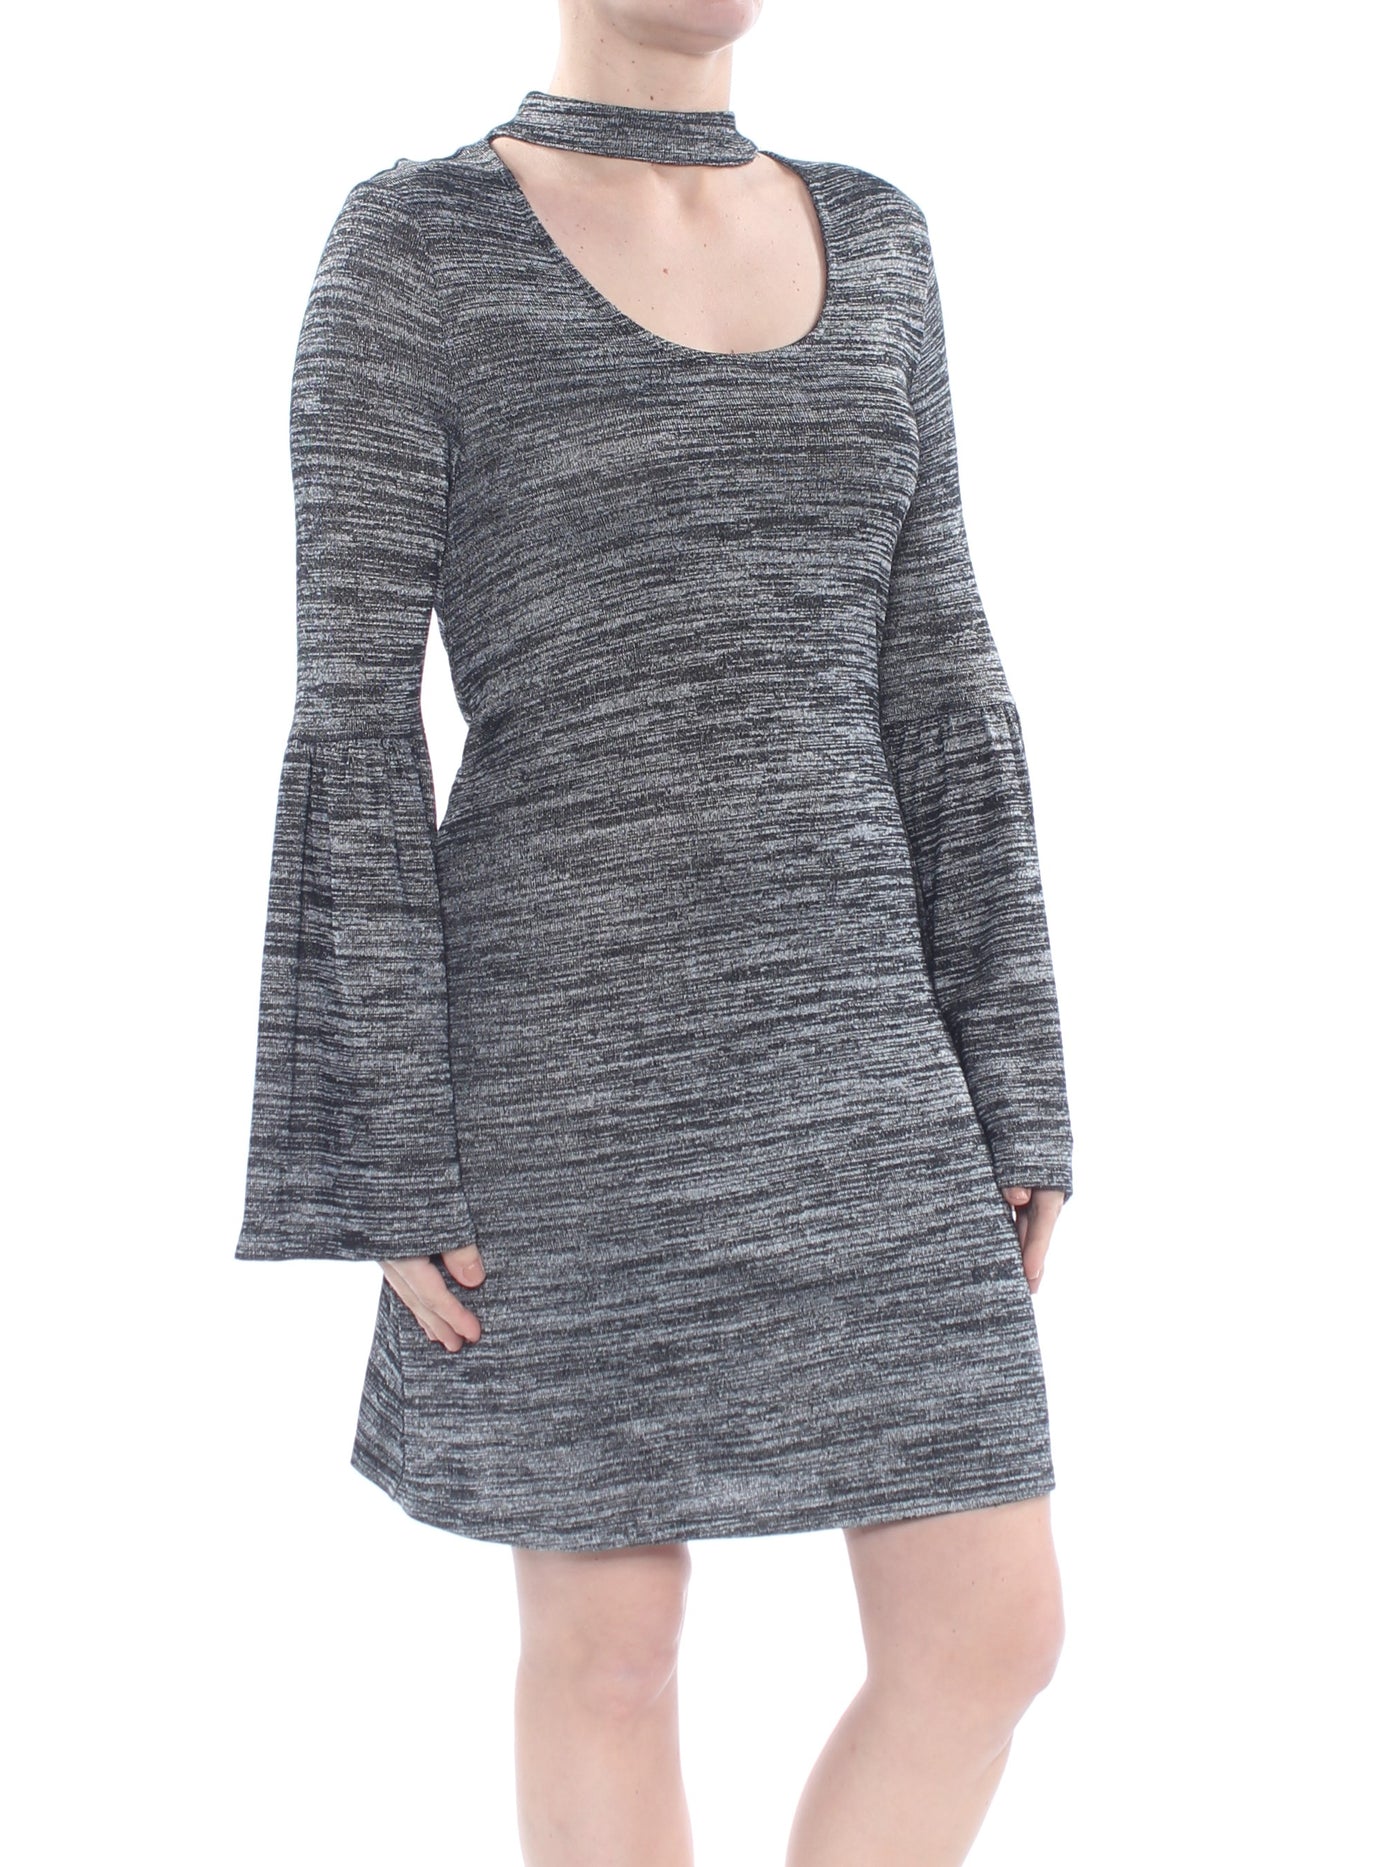 KENSIE Womens Gray Choker Spaced Dyed Bell Sleeve Scoop Neck Above The Knee Party Dress